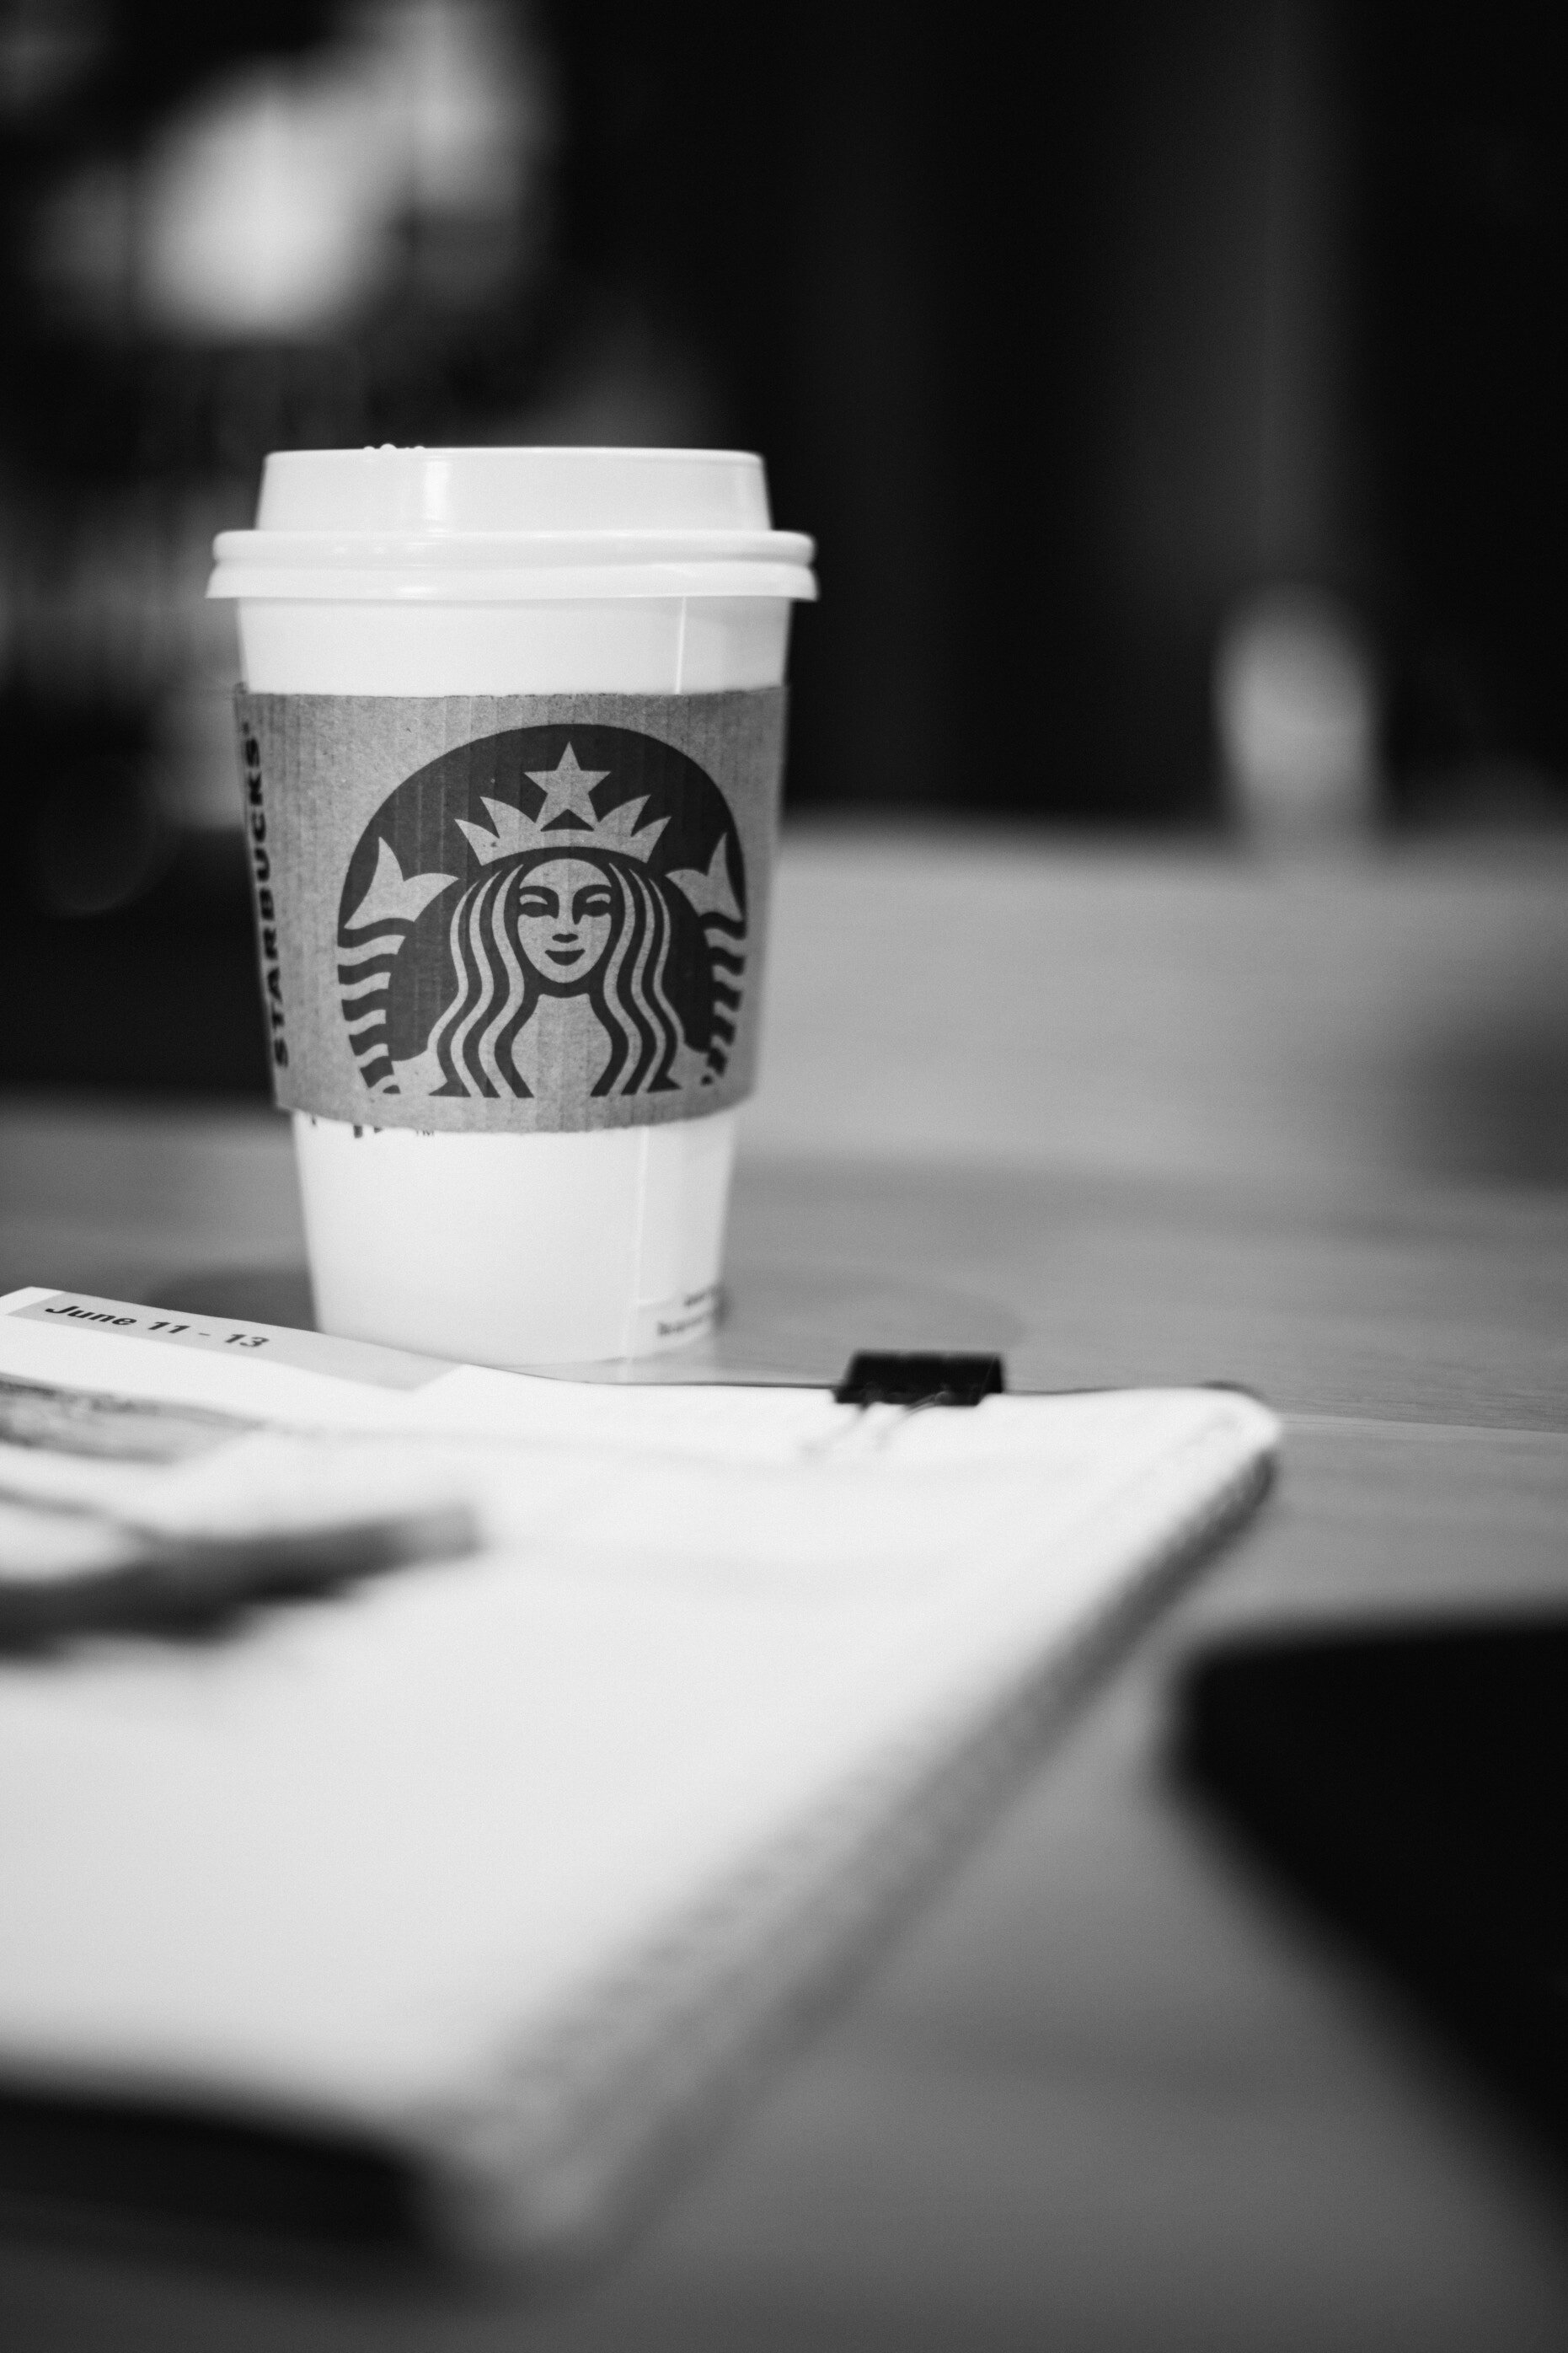 A Starbucks disposable cup sits on a table, with papers in the foreground.